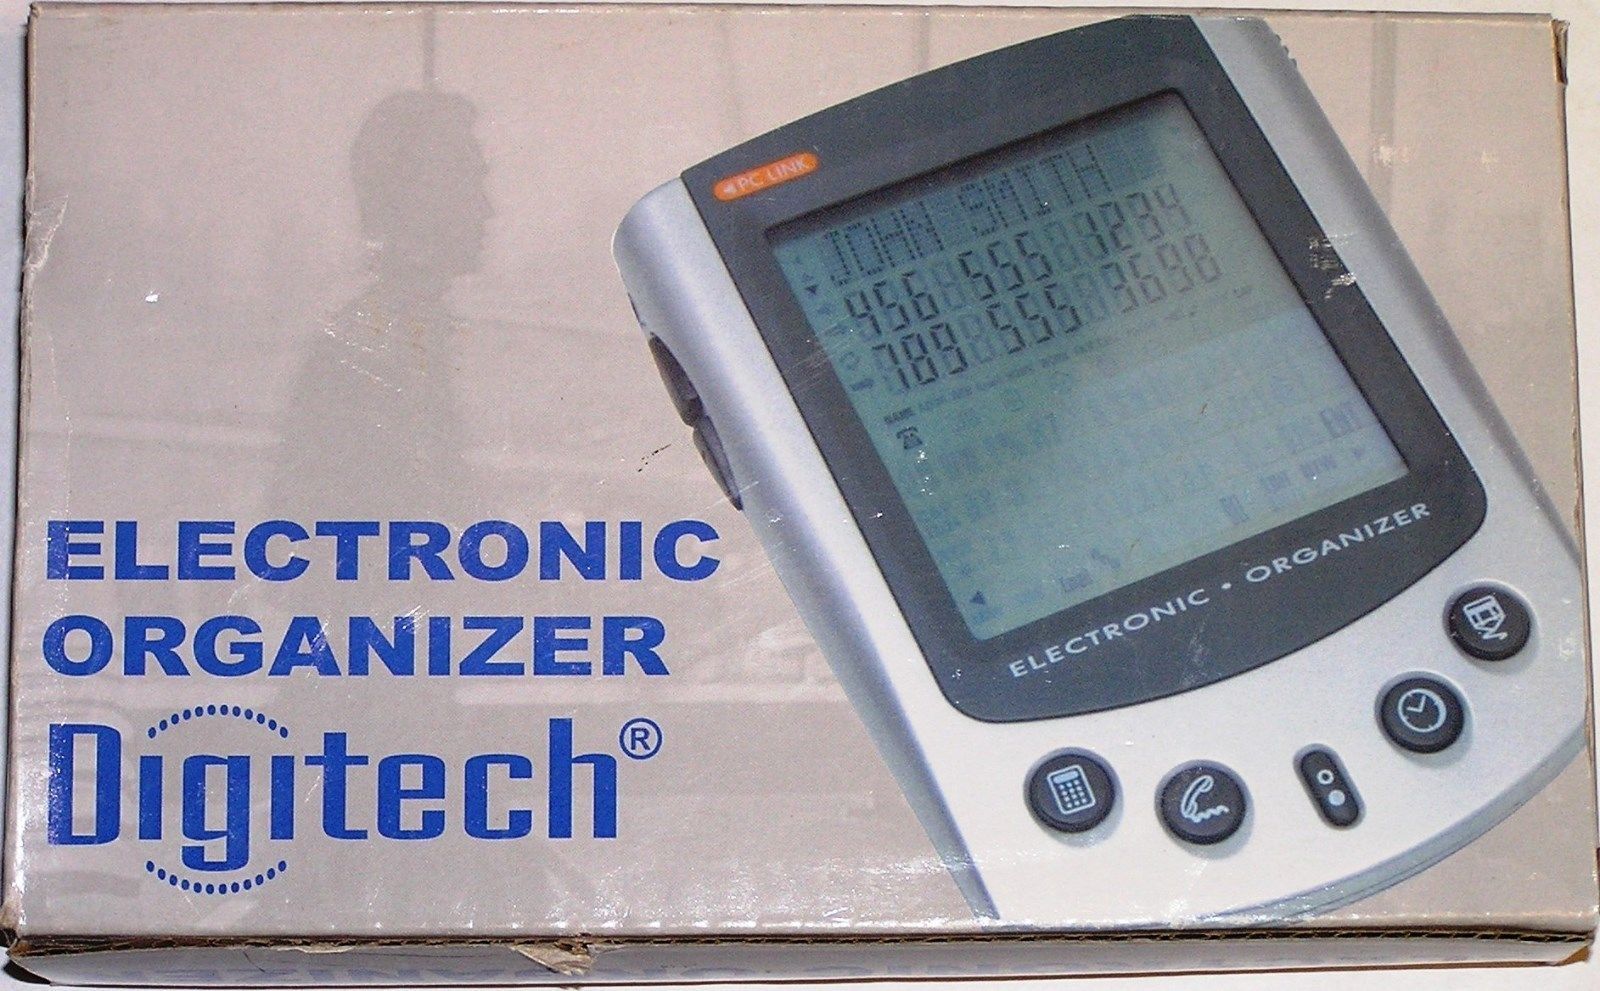 Vintage Digitech Calc2200 Electronic Organizer with Manual & Software - NOS - $9.99